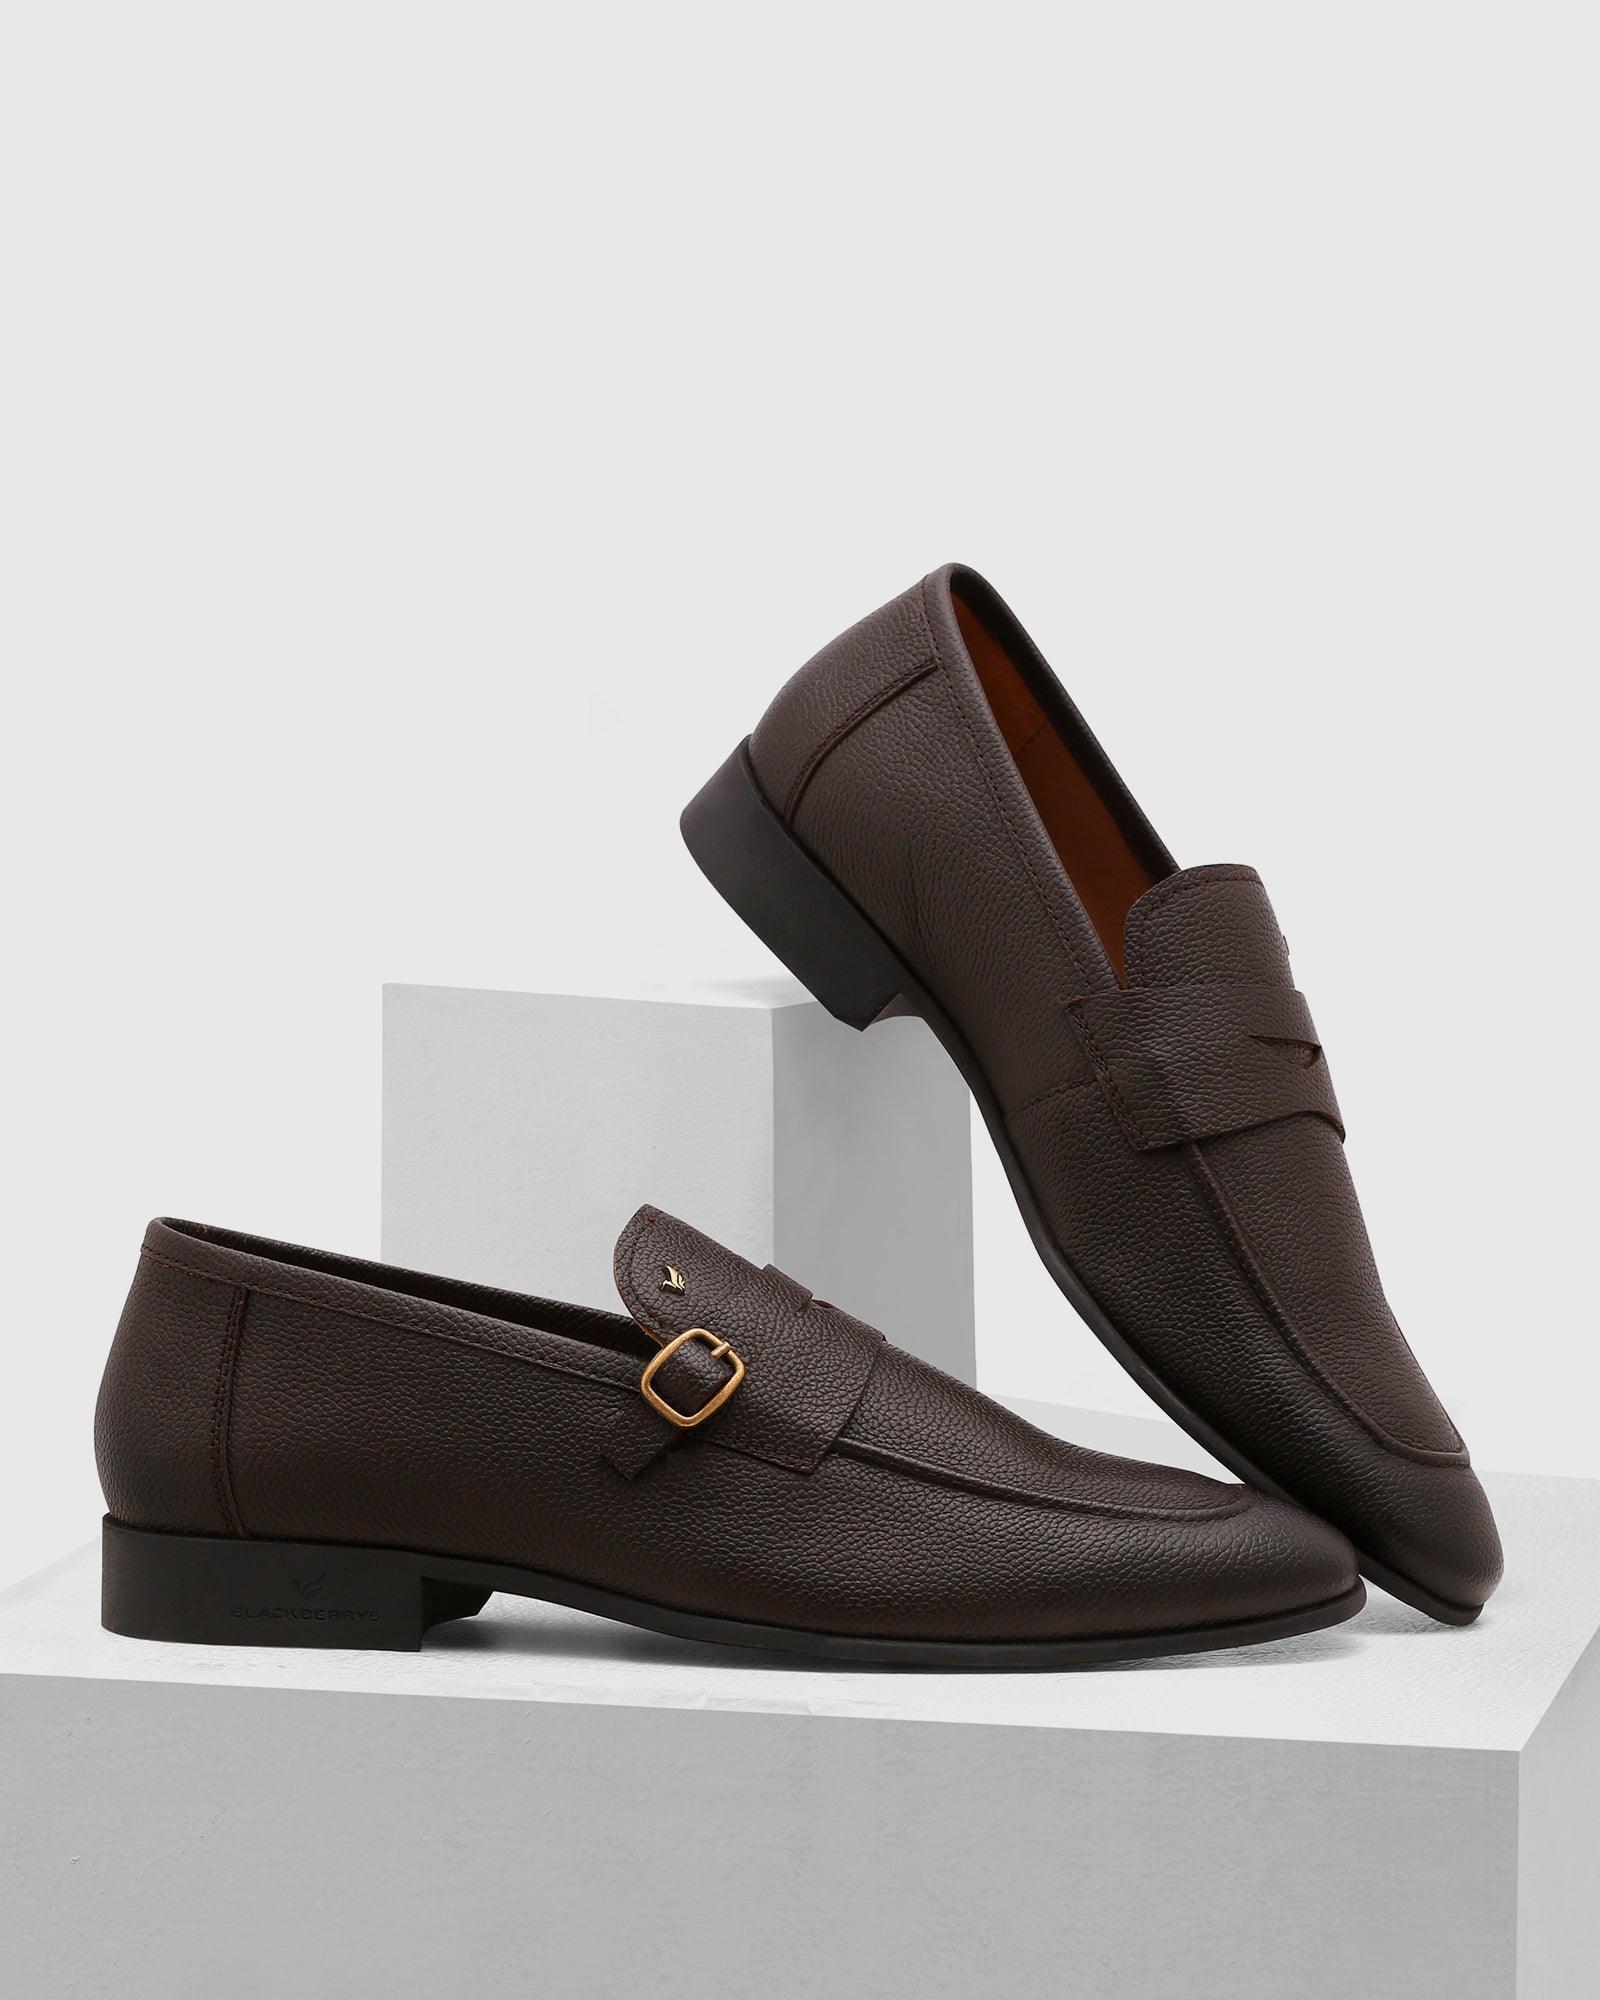 textured-leather-slip-on-shoes-in-brown-(qatar)